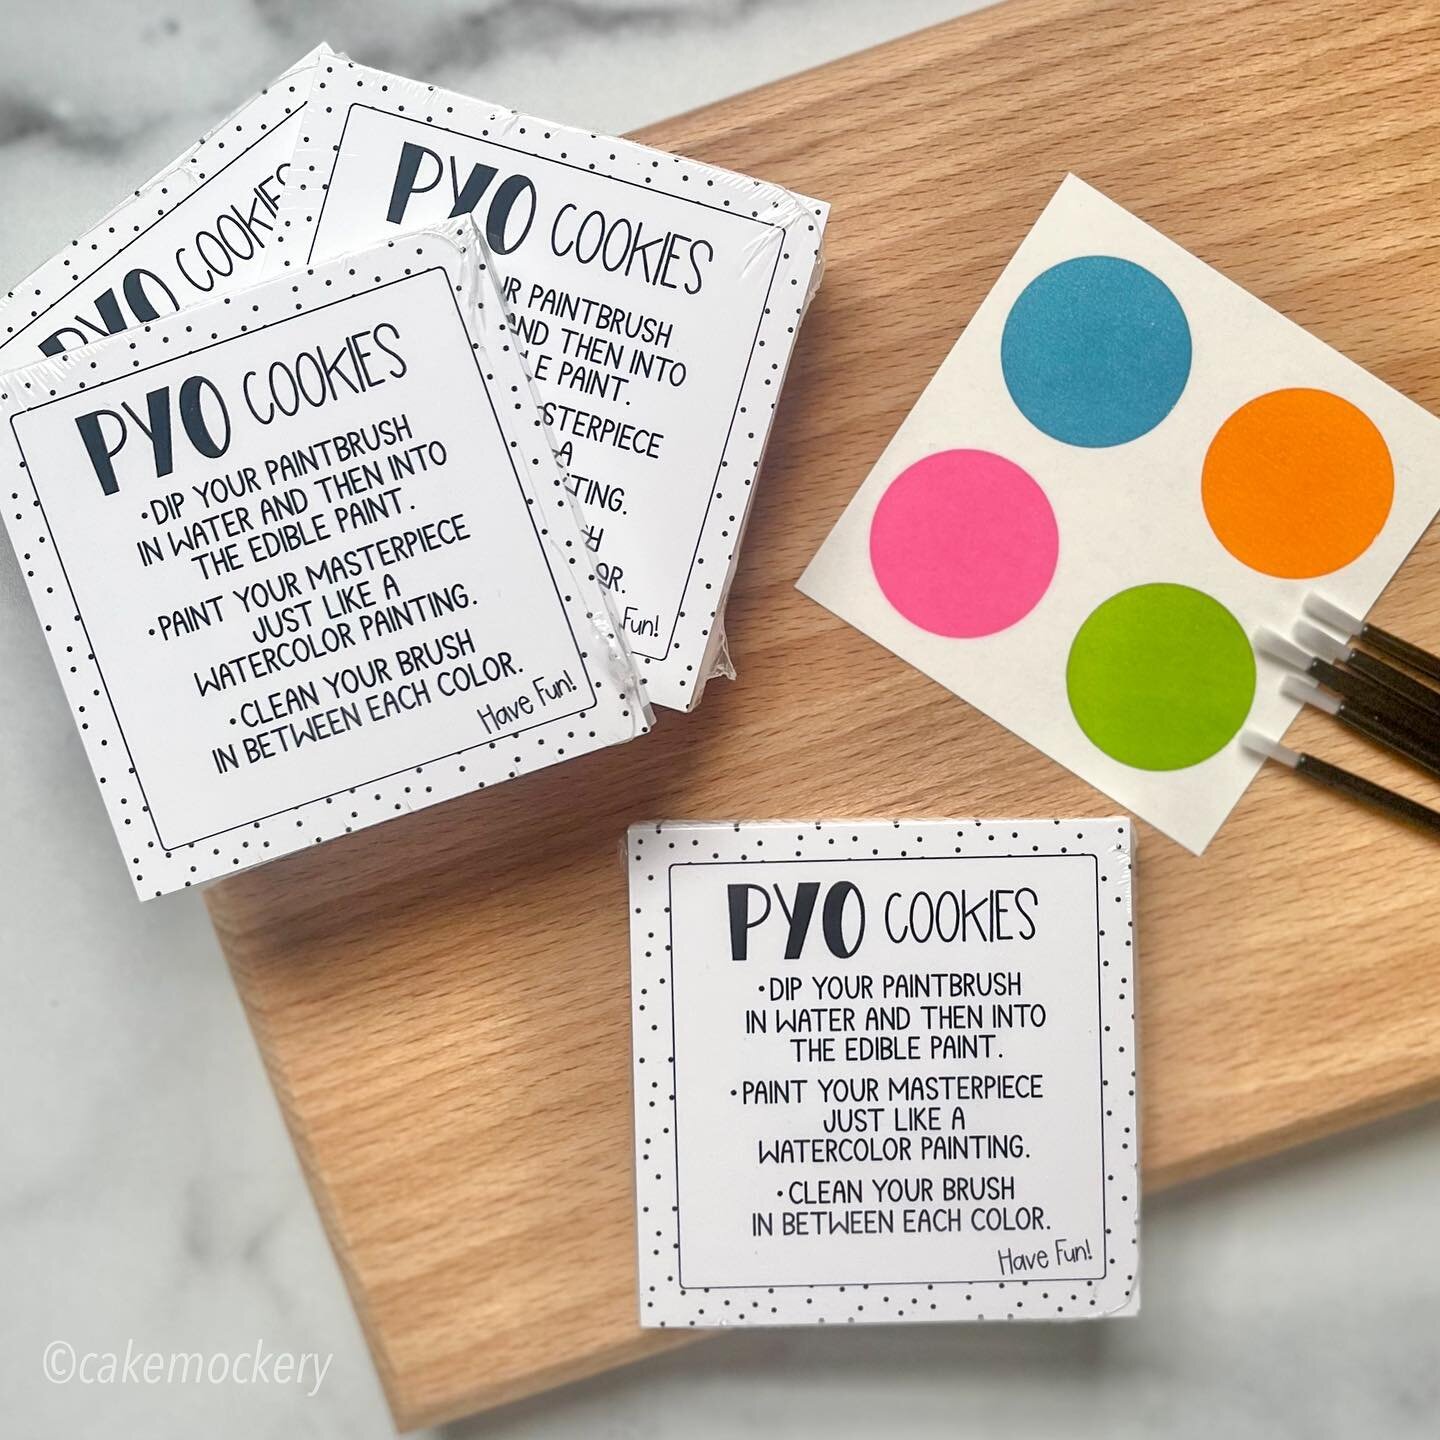 Just loaded in the shop!!!! Physical generic PYO instructional cards!  3.25&rdquo; square cards made to size match the popular paint palettes!  They work for any design paint your own style out there!  Available in packs of 25 or bundles of 100!